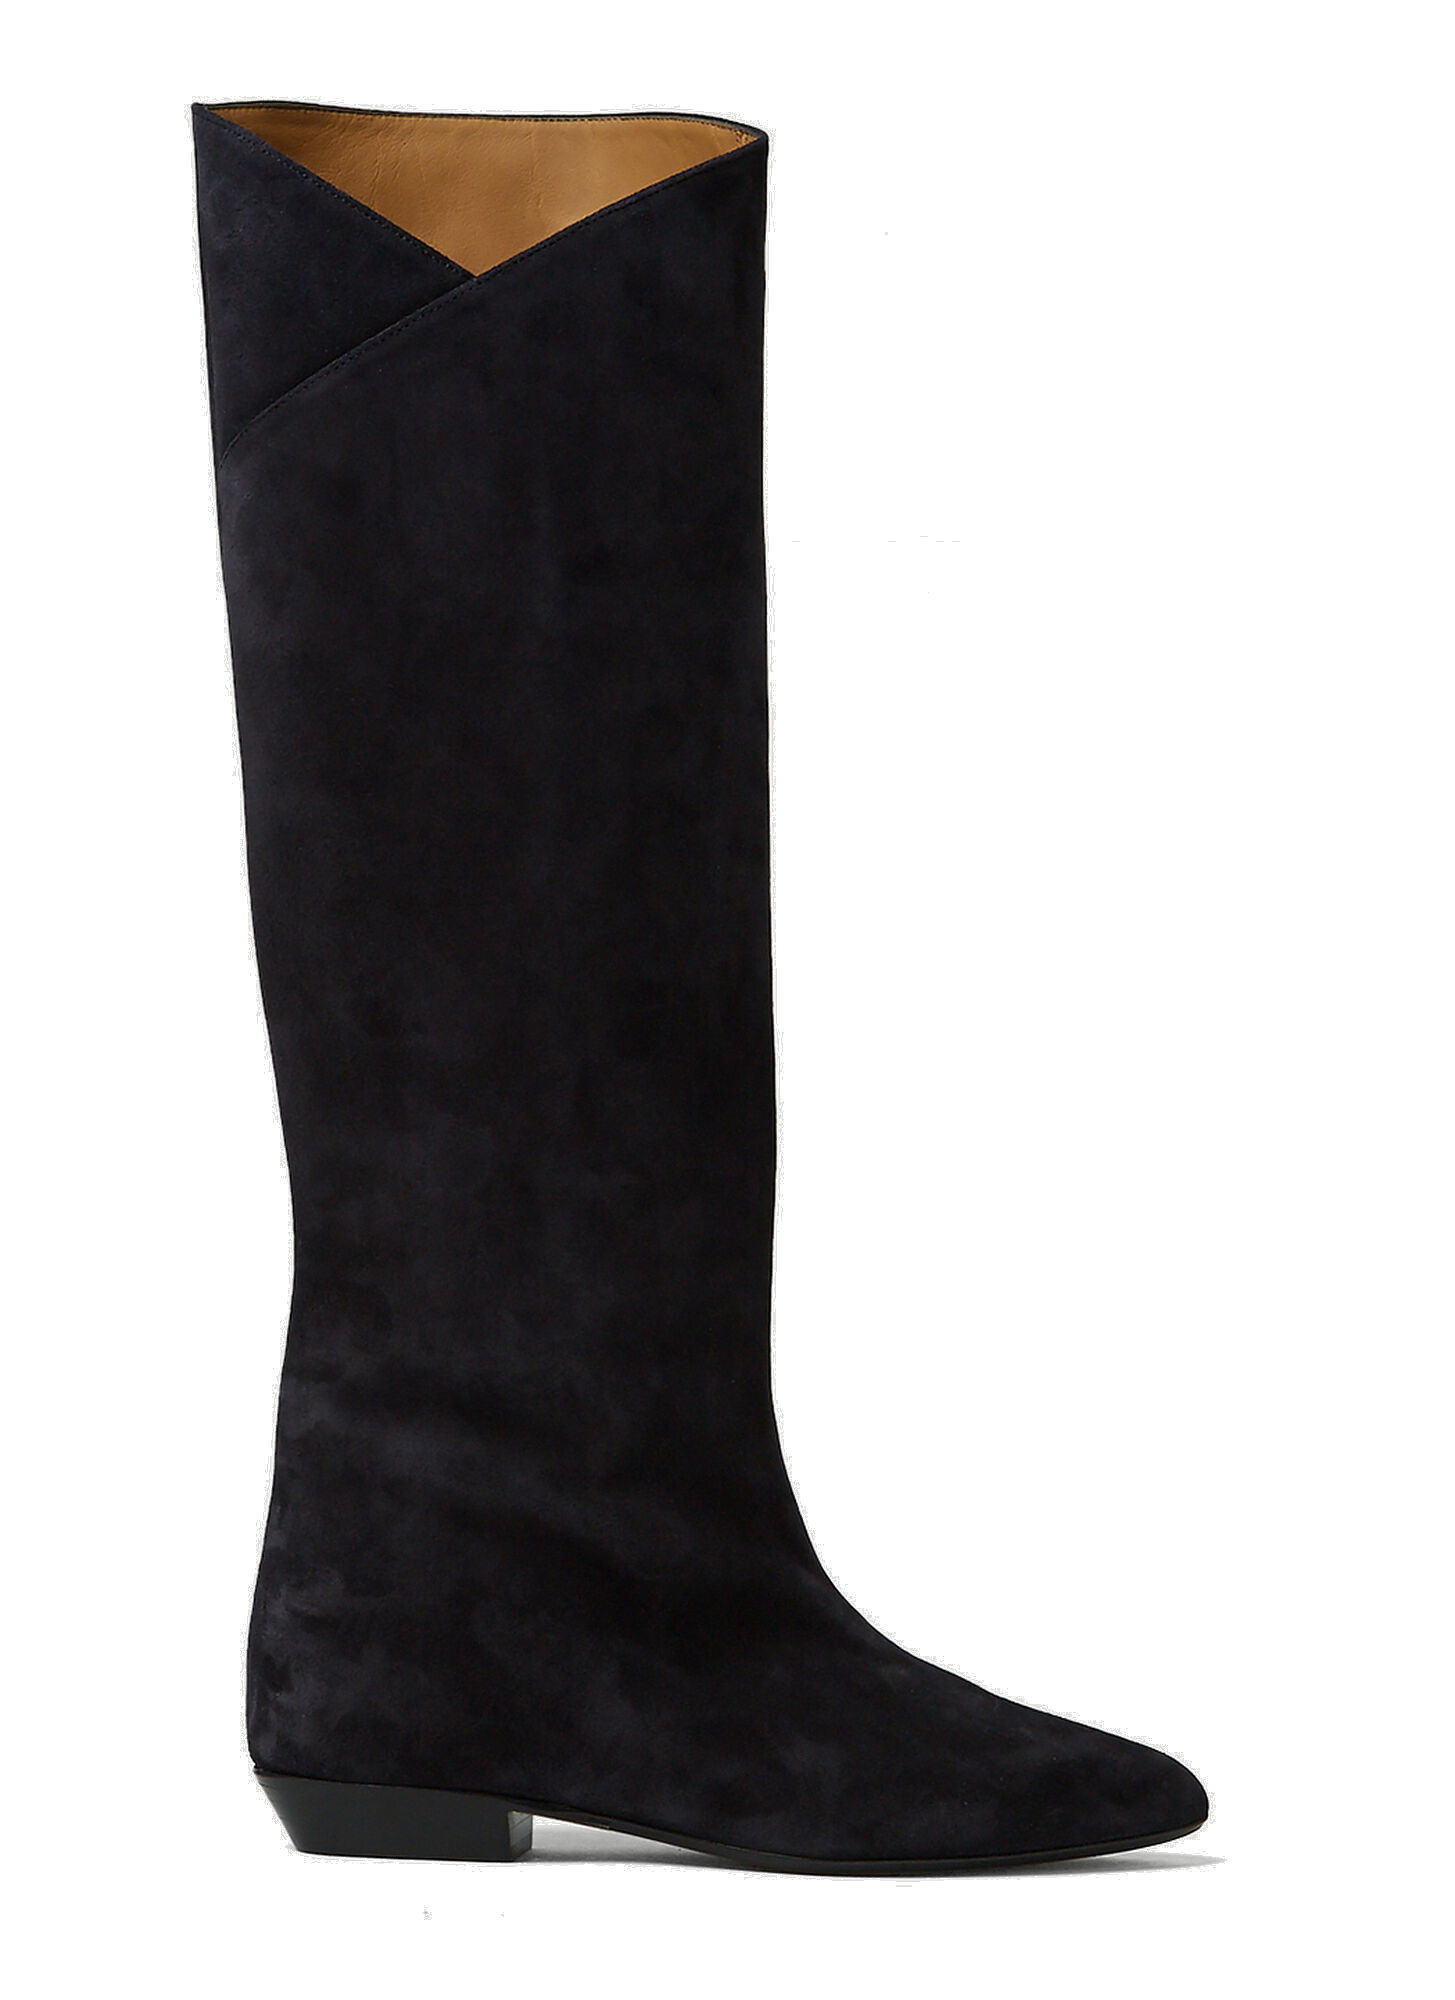 Shany Knee High Boots in Black